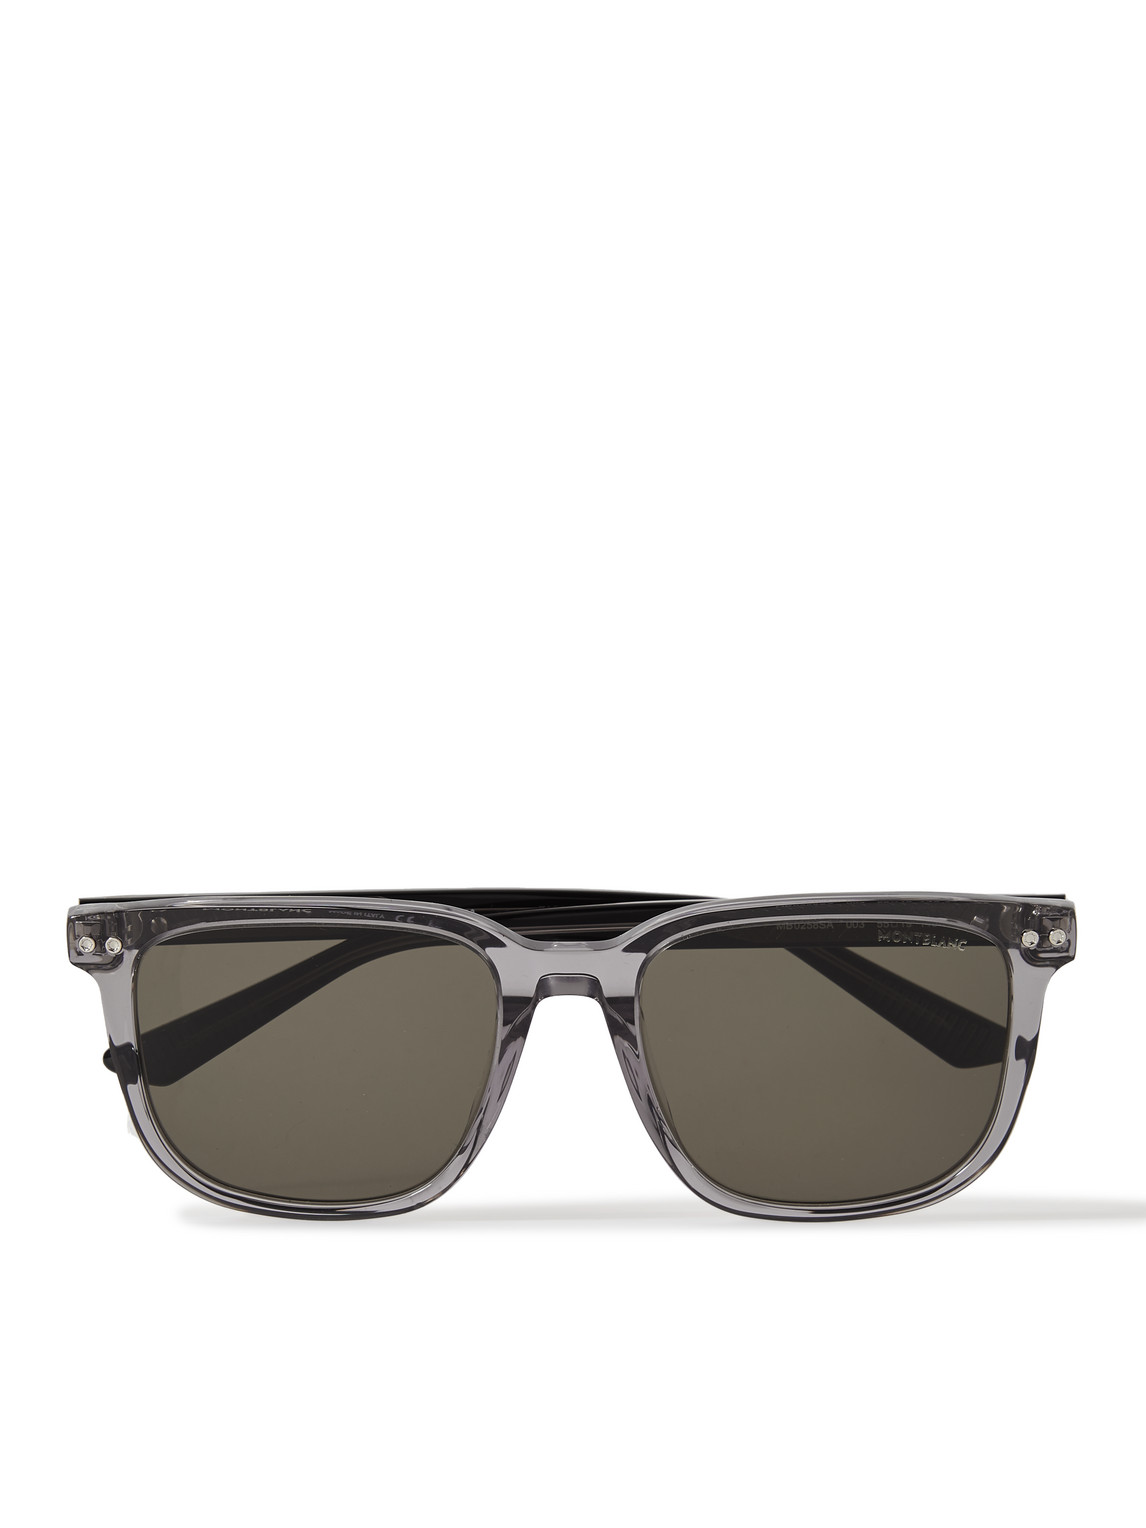 Montblanc D-frame Acetate Sunglasses In Gray